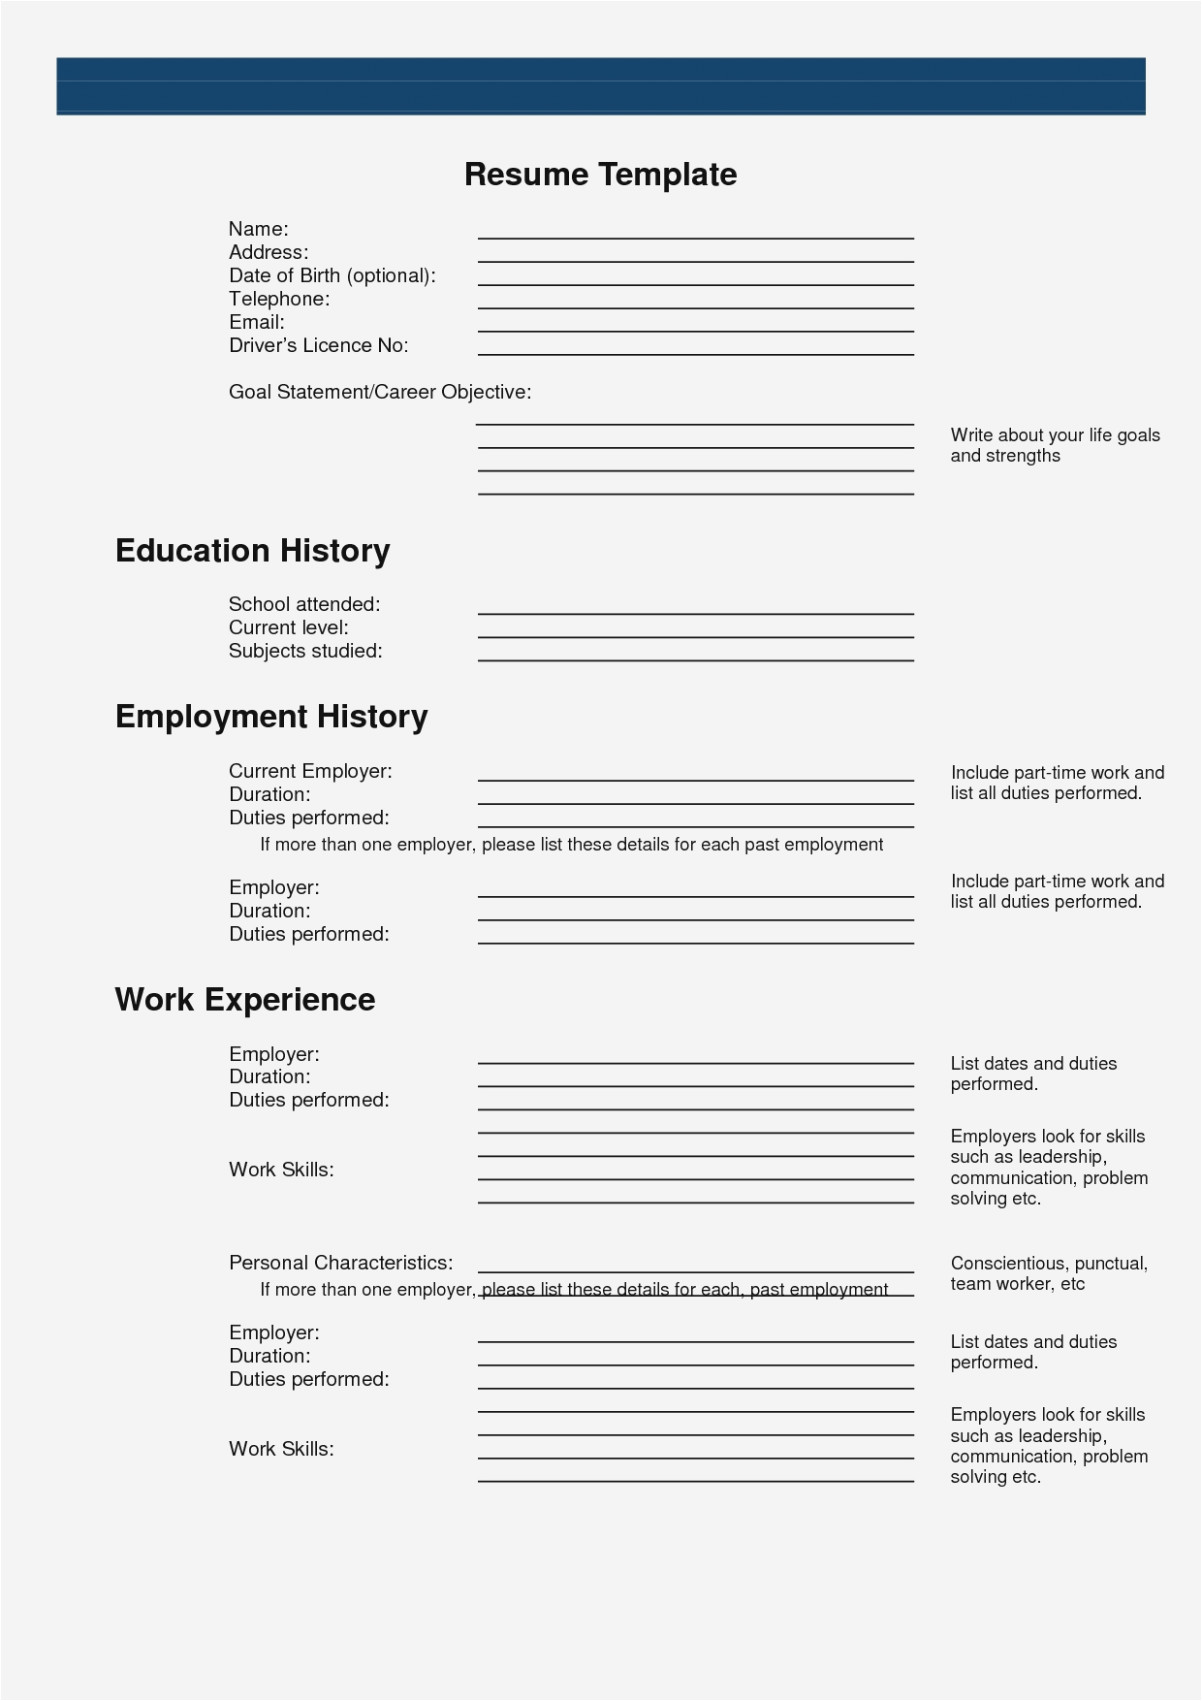 Blank Resume To Fill Out And Print 15 Brilliant Ways To Realty Executives Mi Invoice And 0675